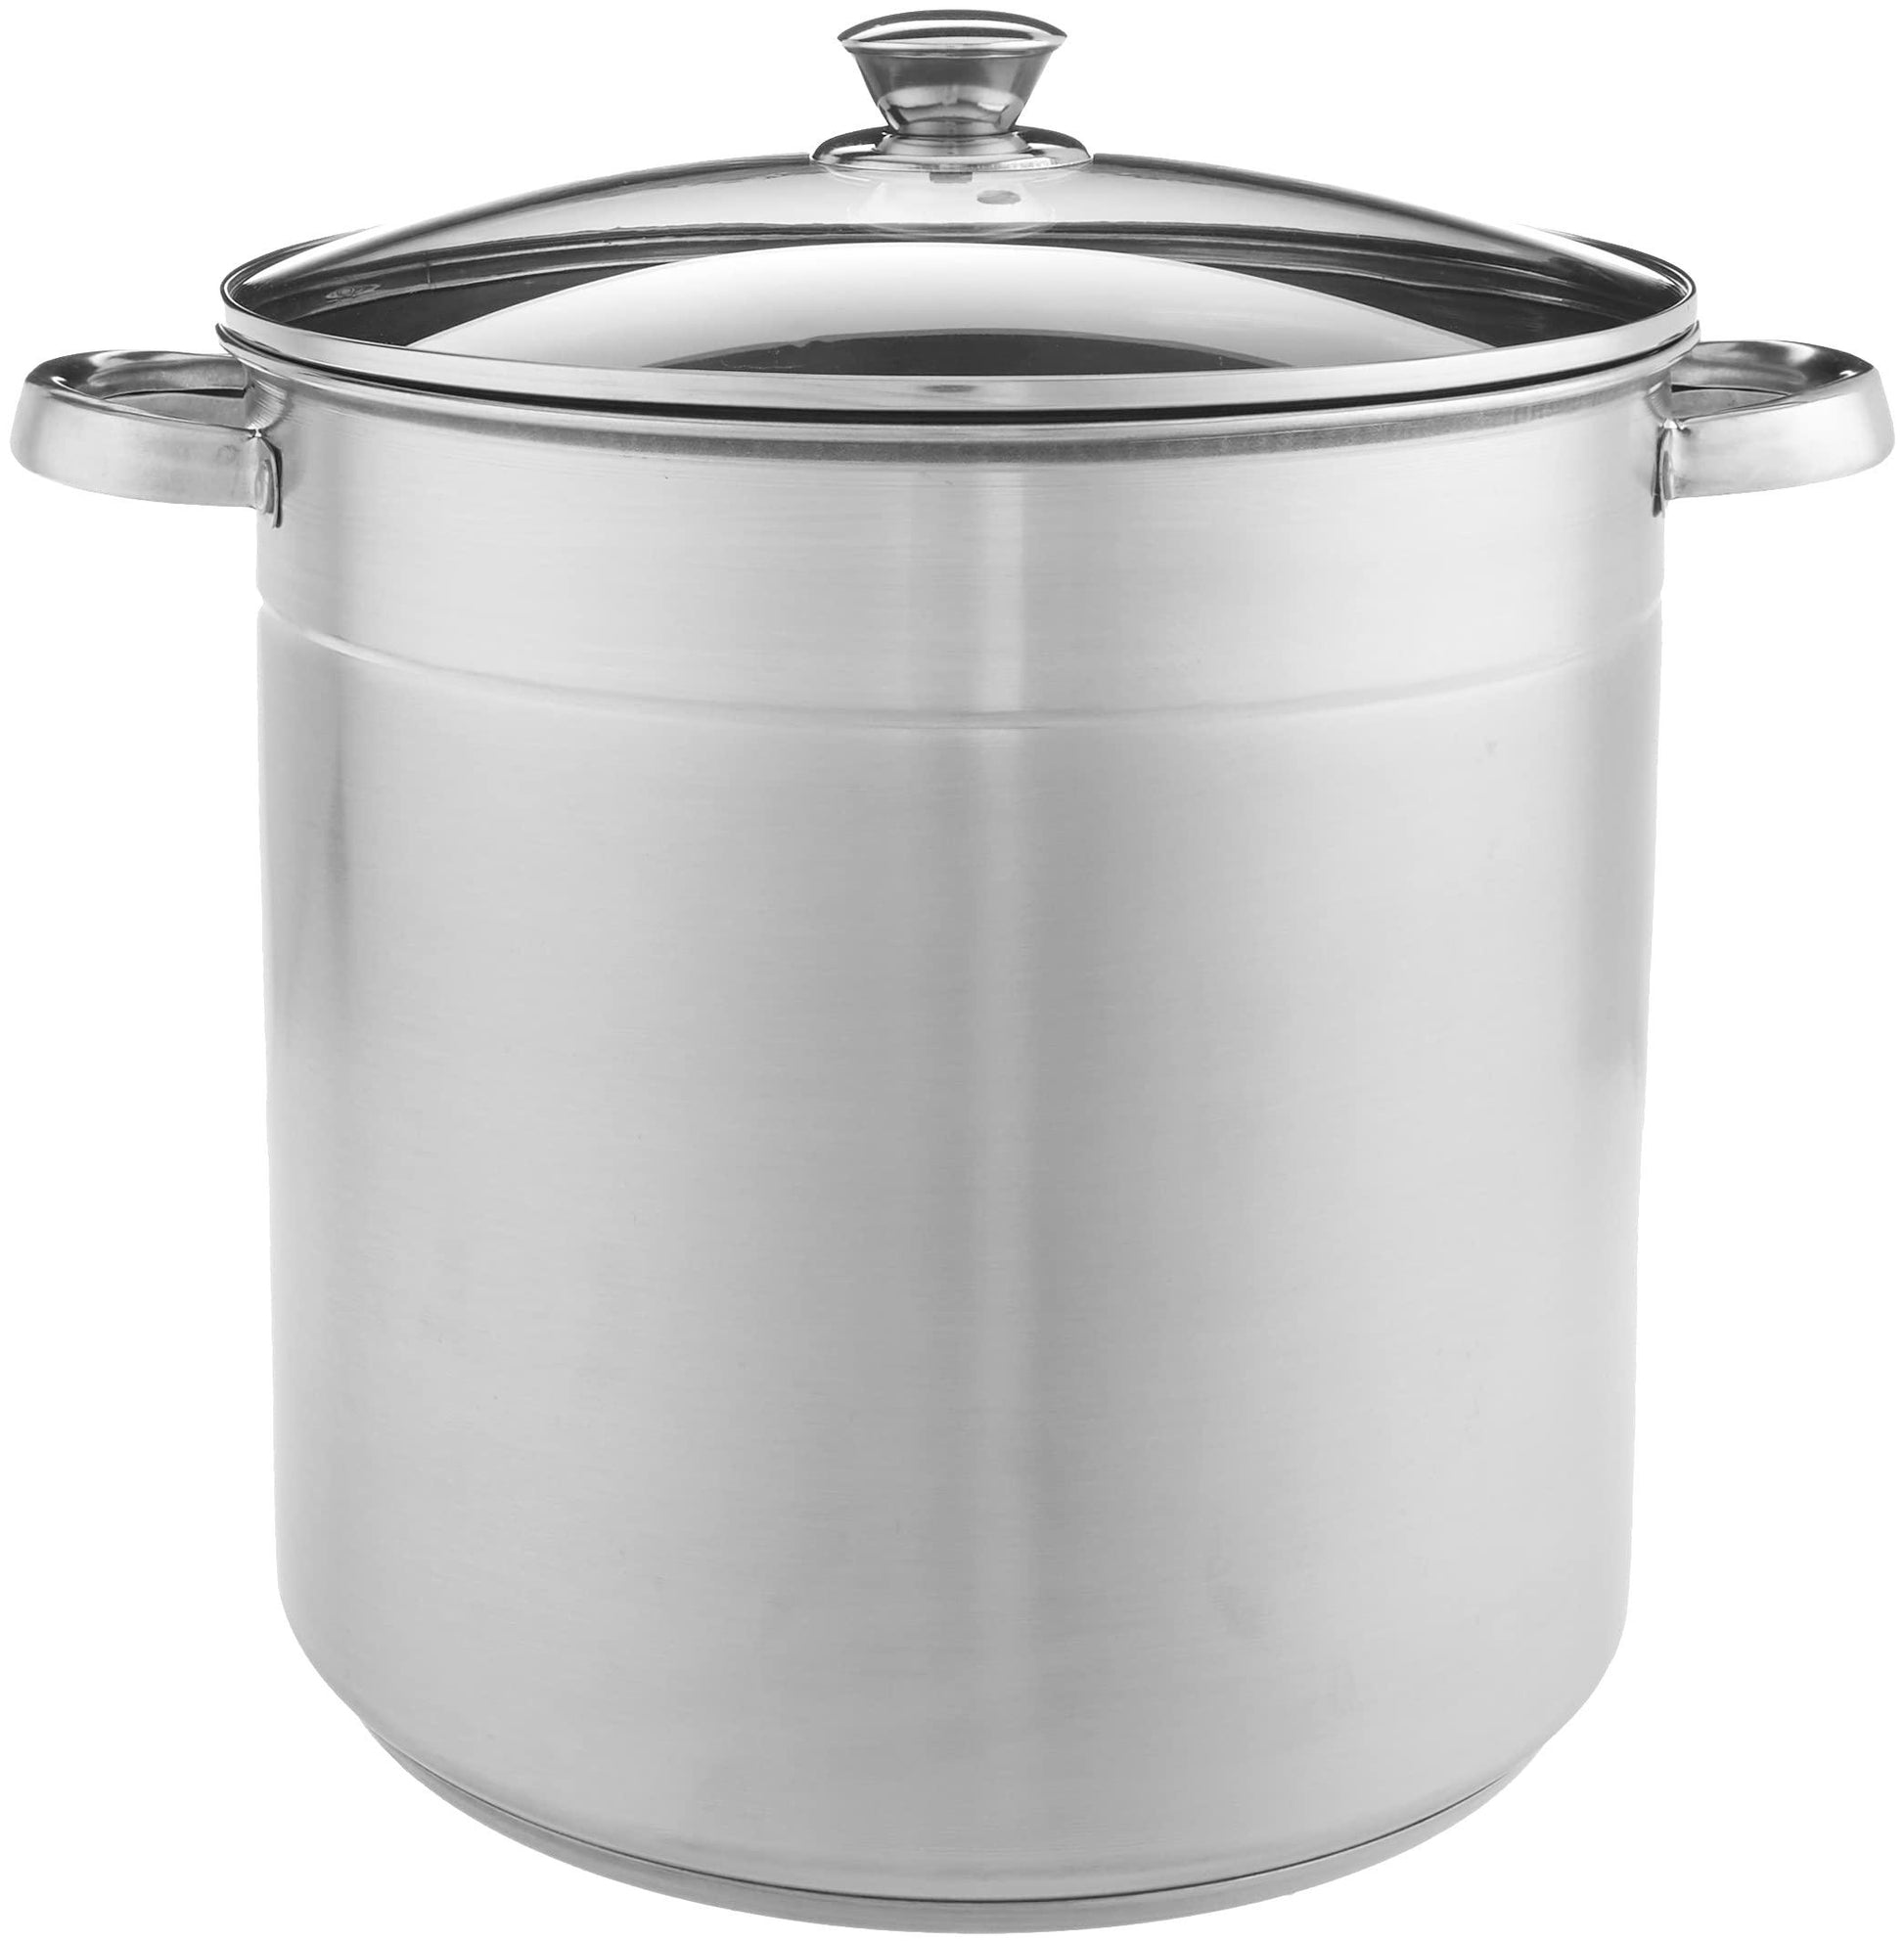 McSunley Stockpot with Encapsulated Bottom Base, 16 Qt, Stainless Steel - CookCave